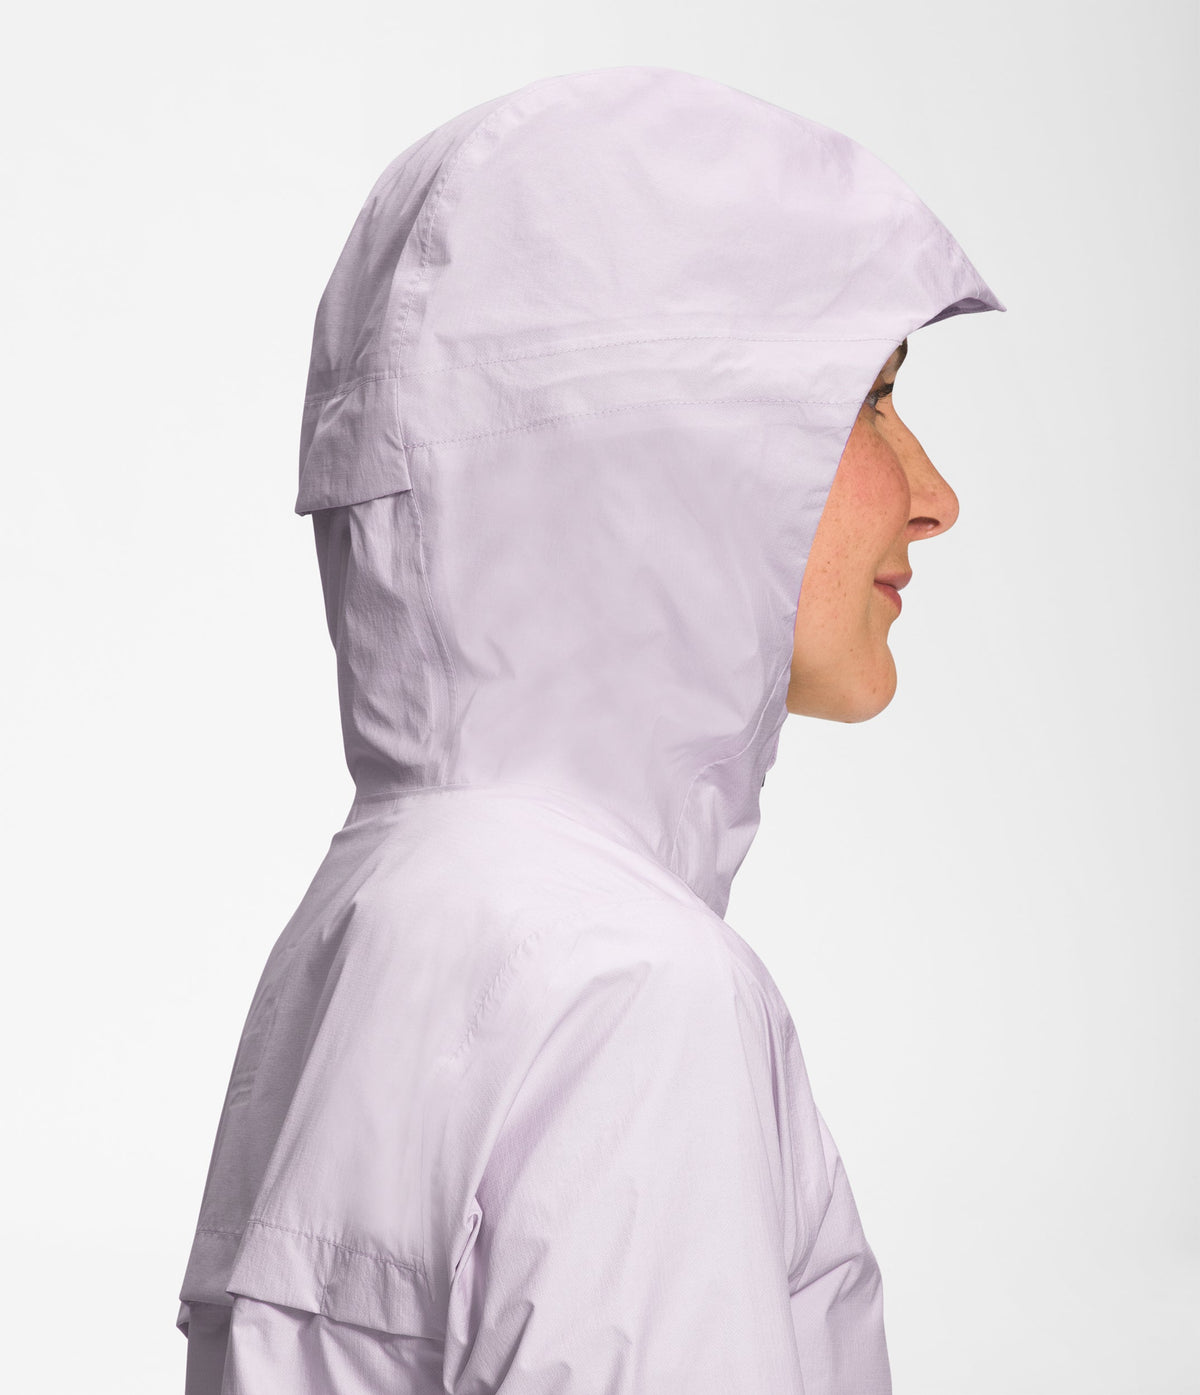 The North Face First Dawn Packable Jacket (Women's) -Lavender Fog